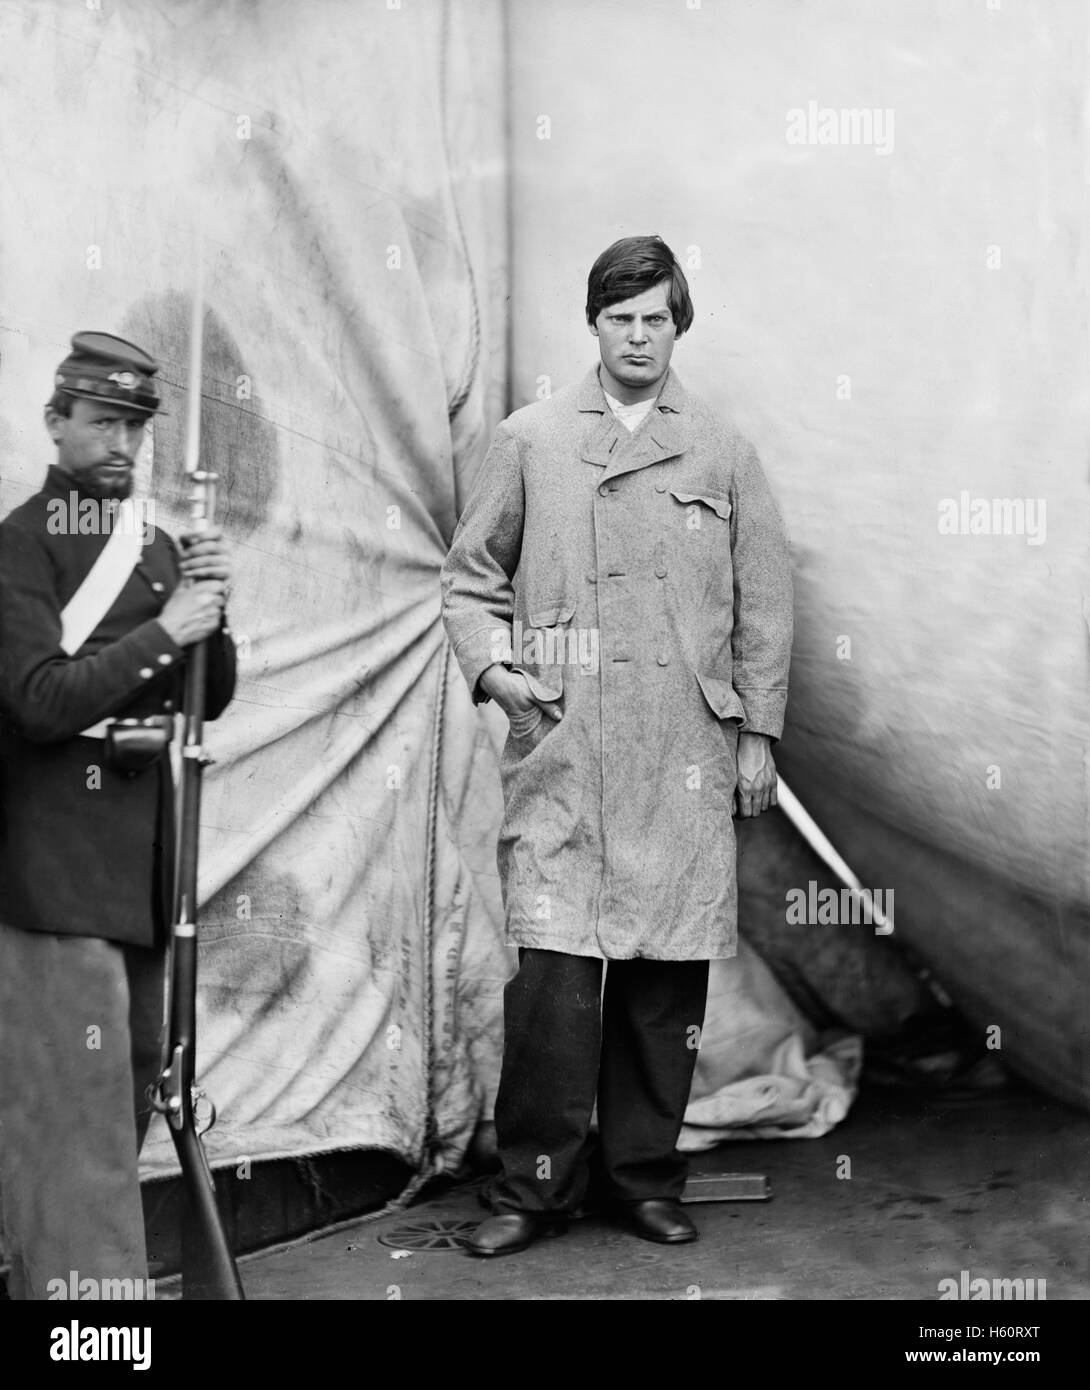 Lewis Powell, also known as Lewis Payne, Attacker of U.S. Secretary of State William H. Seward, and Conspirator in Assassination of U.S. President Abraham Lincoln, Standing in Overcoat, Washington Navy Yard, Washington DC, USA, by Alexander Gardner, April 1865 Stock Photo